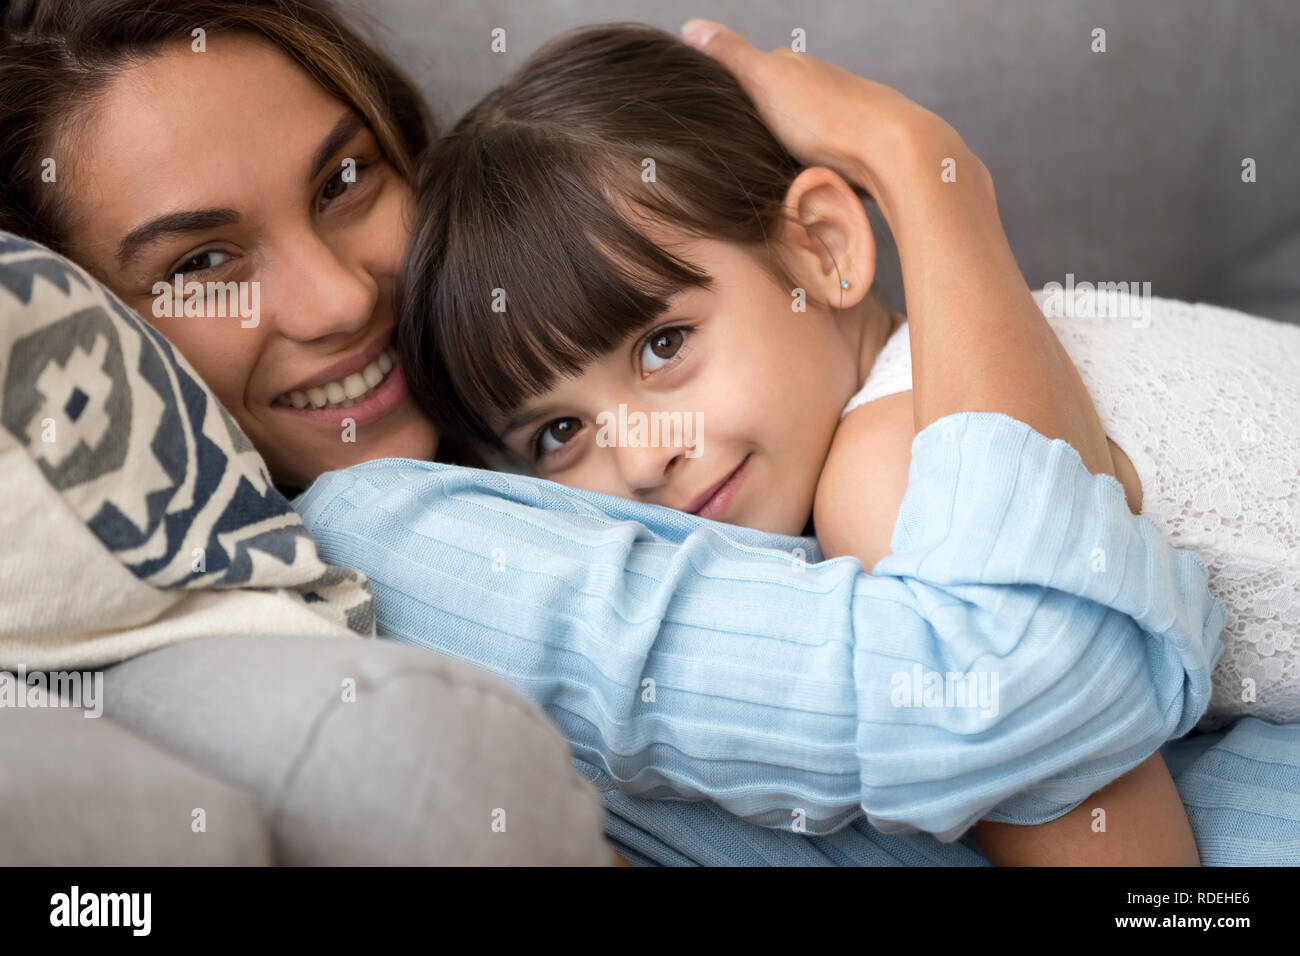 Loving mom embracing adorable kid daughter relaxing on sofa, por Stock Photo